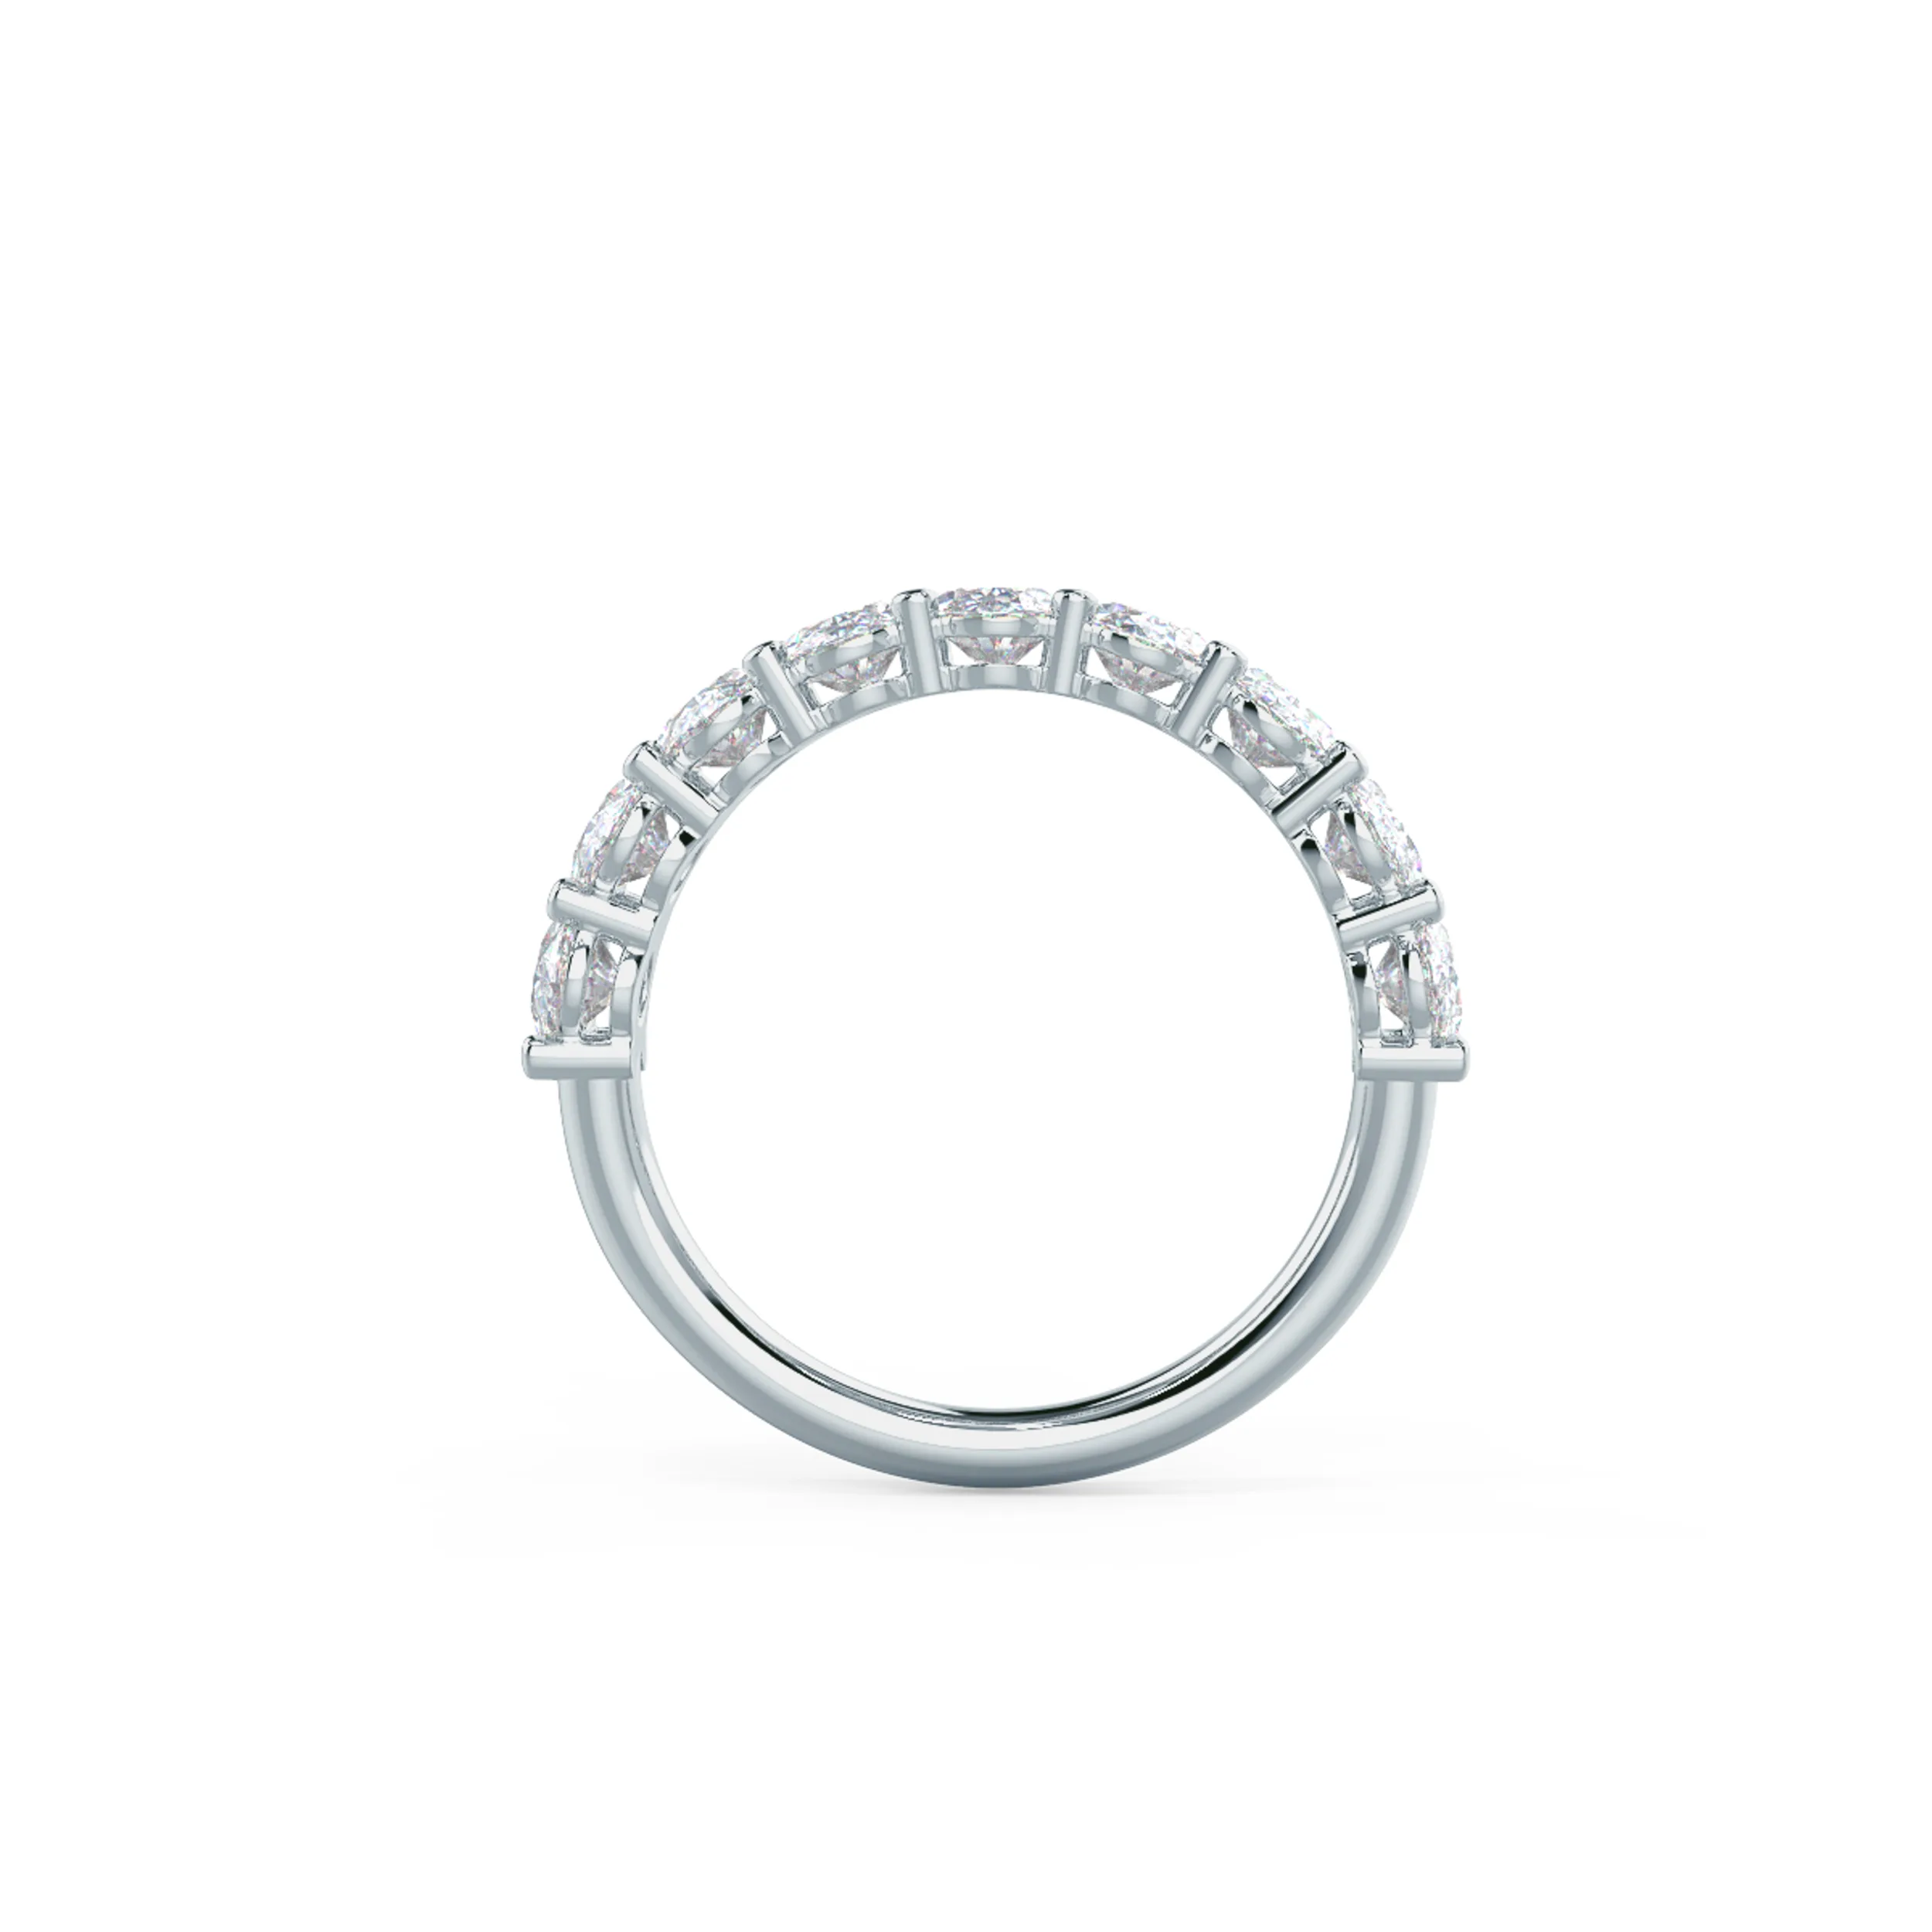 2.5 ct Synthetic Diamonds Oval Basket Half Band in 18k White Gold (Profile View)